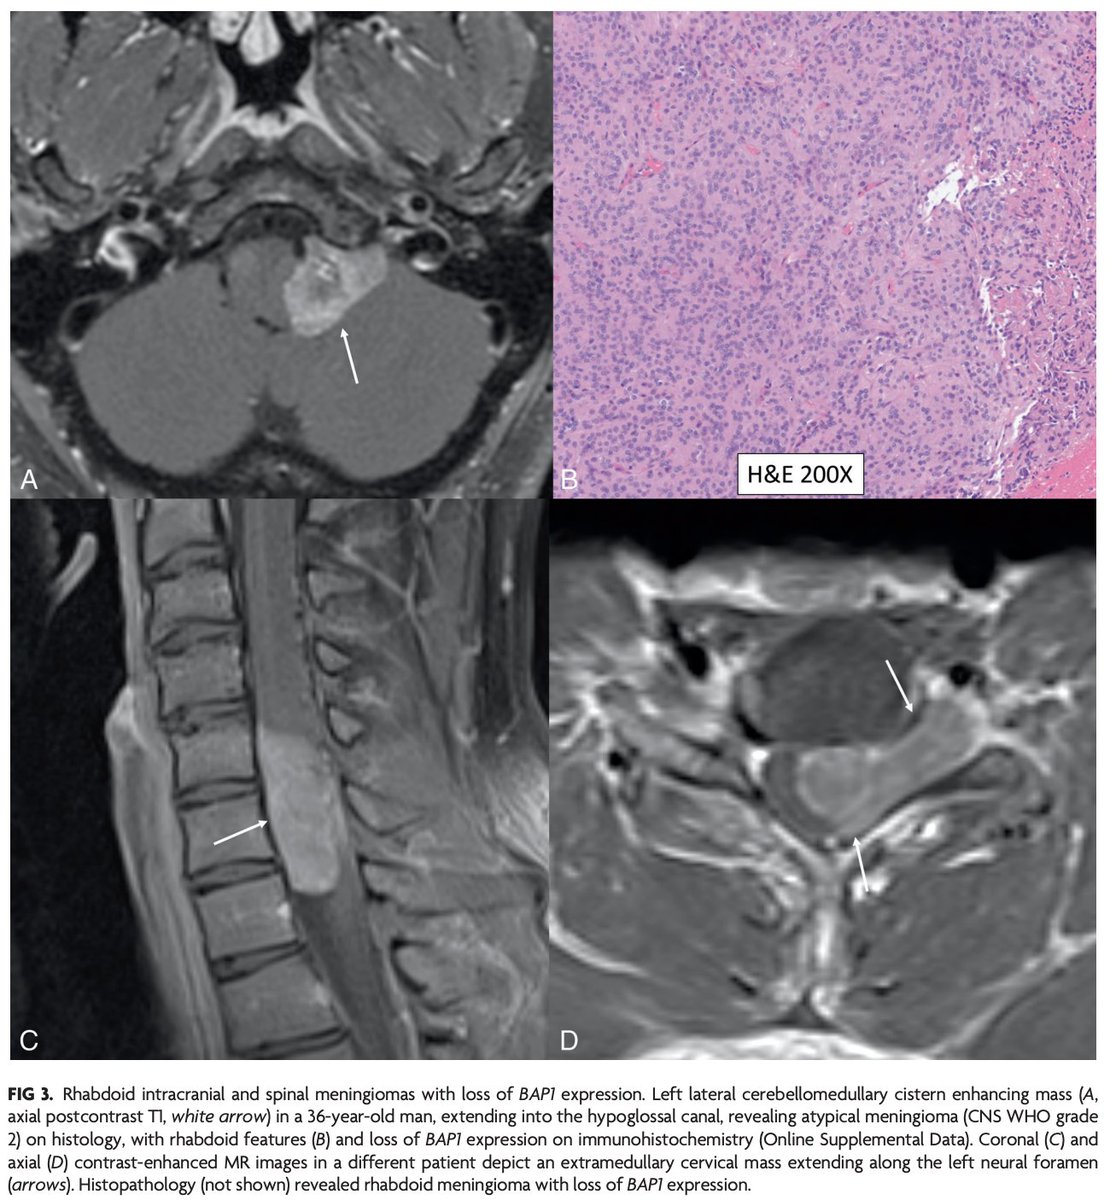 'Newly Recognized Genetic Tumor Syndromes of the CNS in the 5th WHO Classification: Imaging Overview with Genetic Updates' doi.org/10.3174/ajnr.A… @amitagarwalmd #OpenAccess #FellowsJournalClub #SupplementalOnlineData